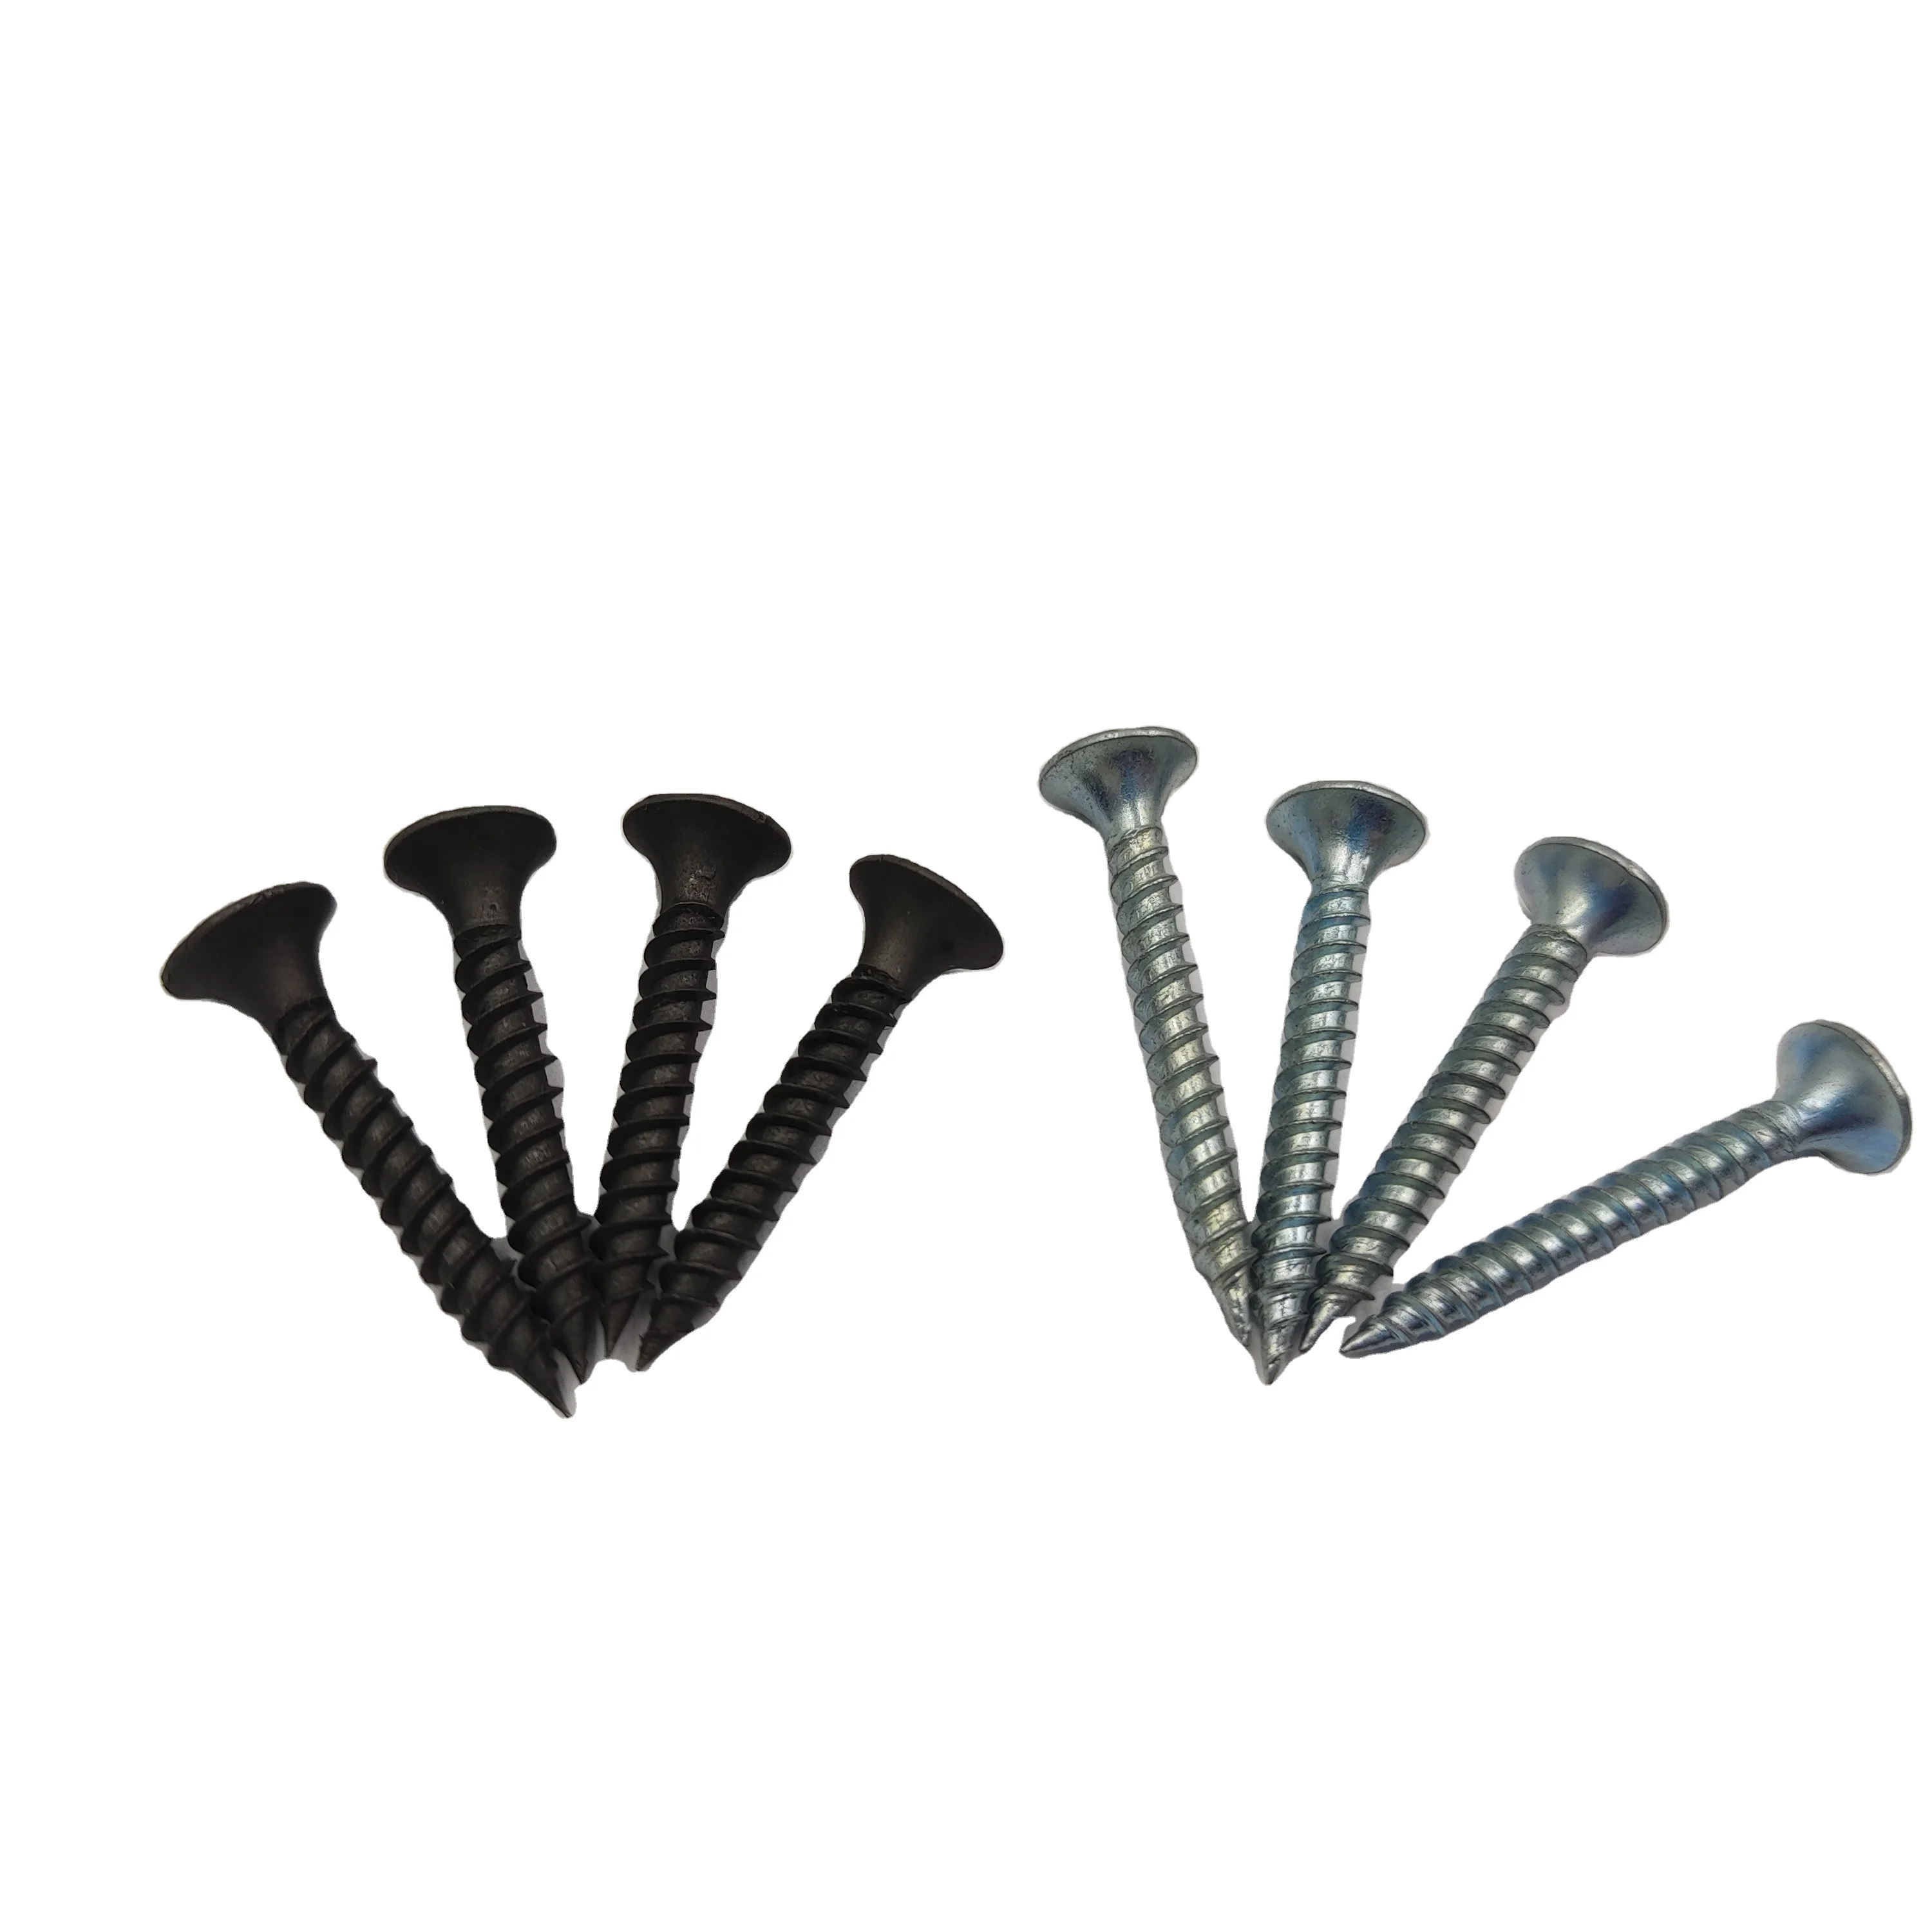 
China Tianjin drywall screw manufacturer factory with best price 